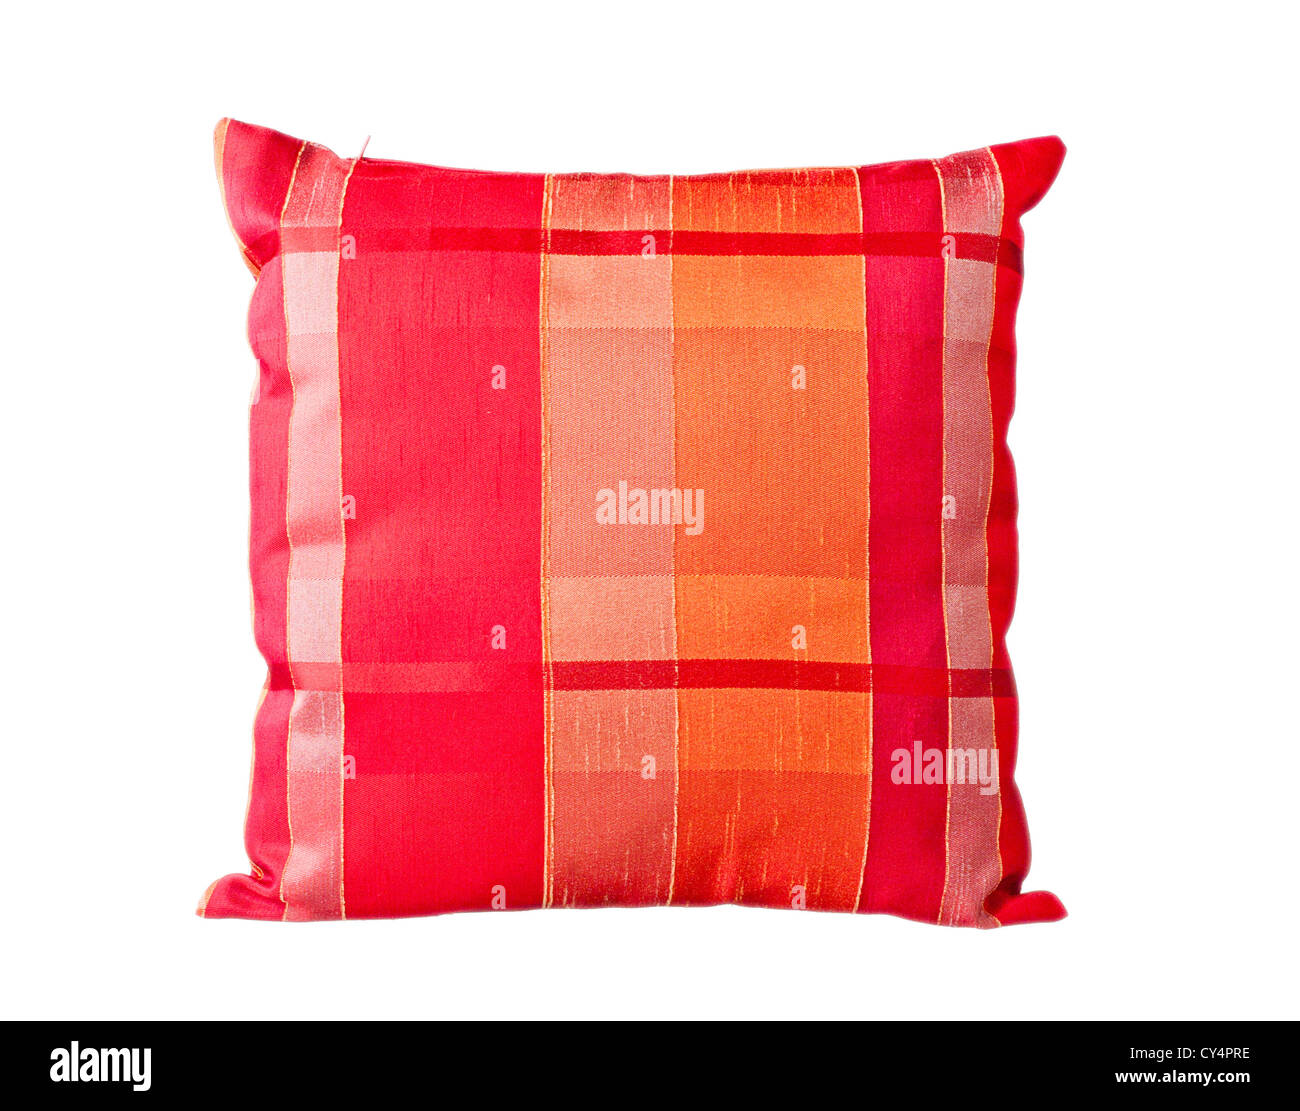 Nice cushion for living room decoration on white background Stock Photo